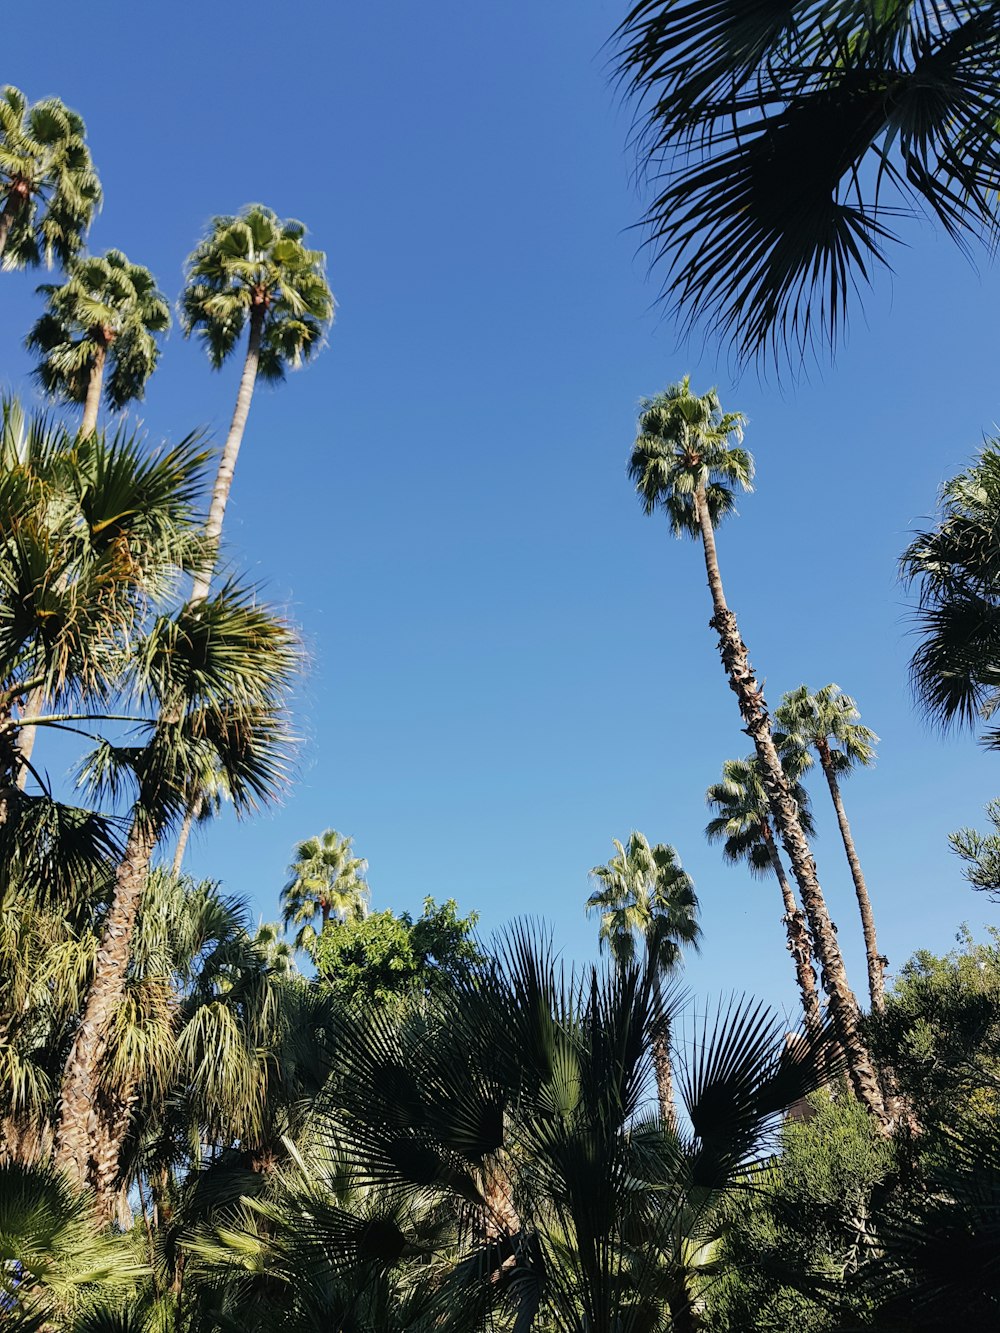 palm trees under blue sky during daytime